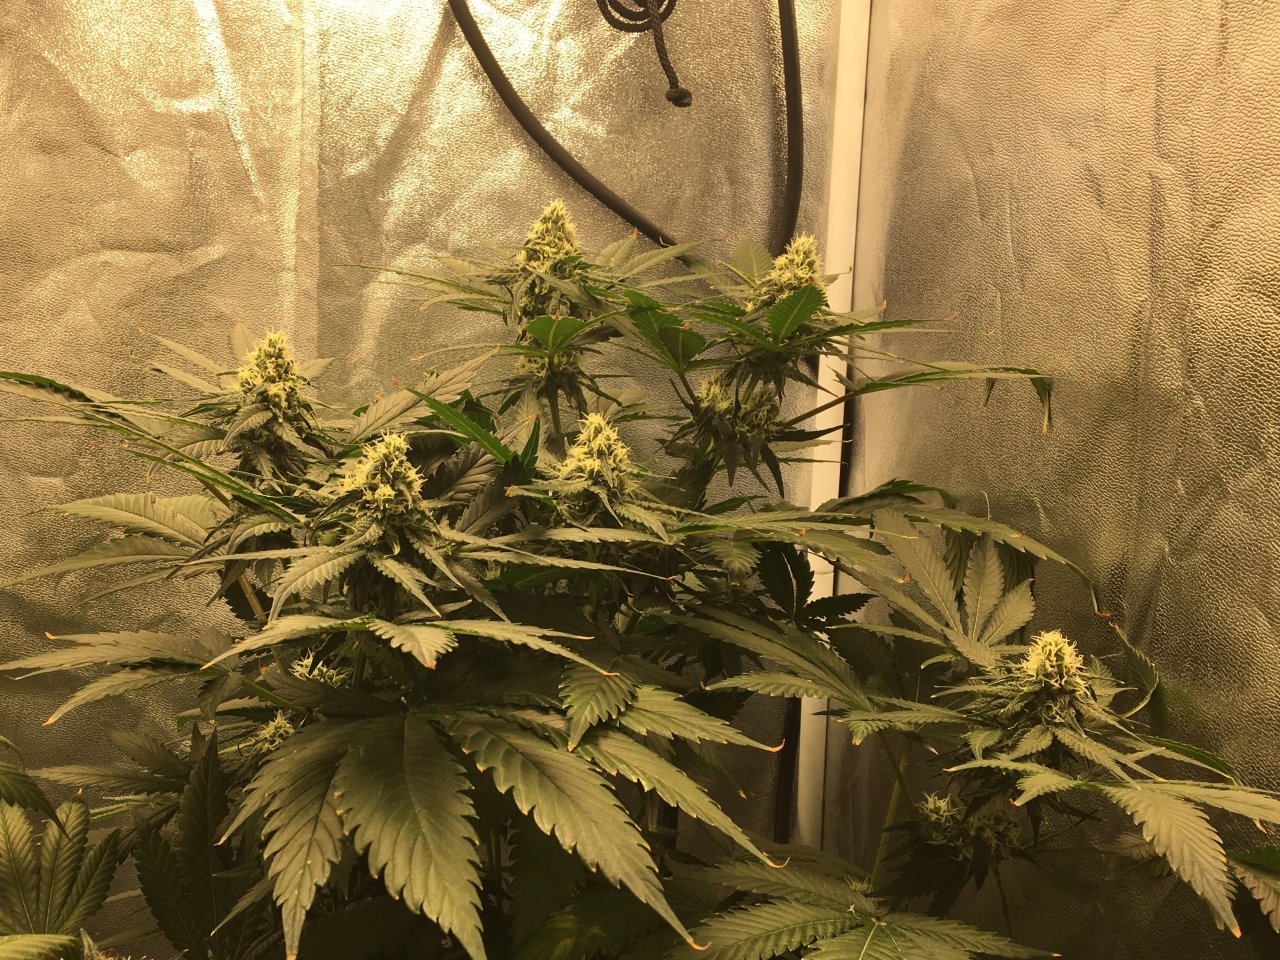 Candy Cane 5 (Day 74, flip + 4)